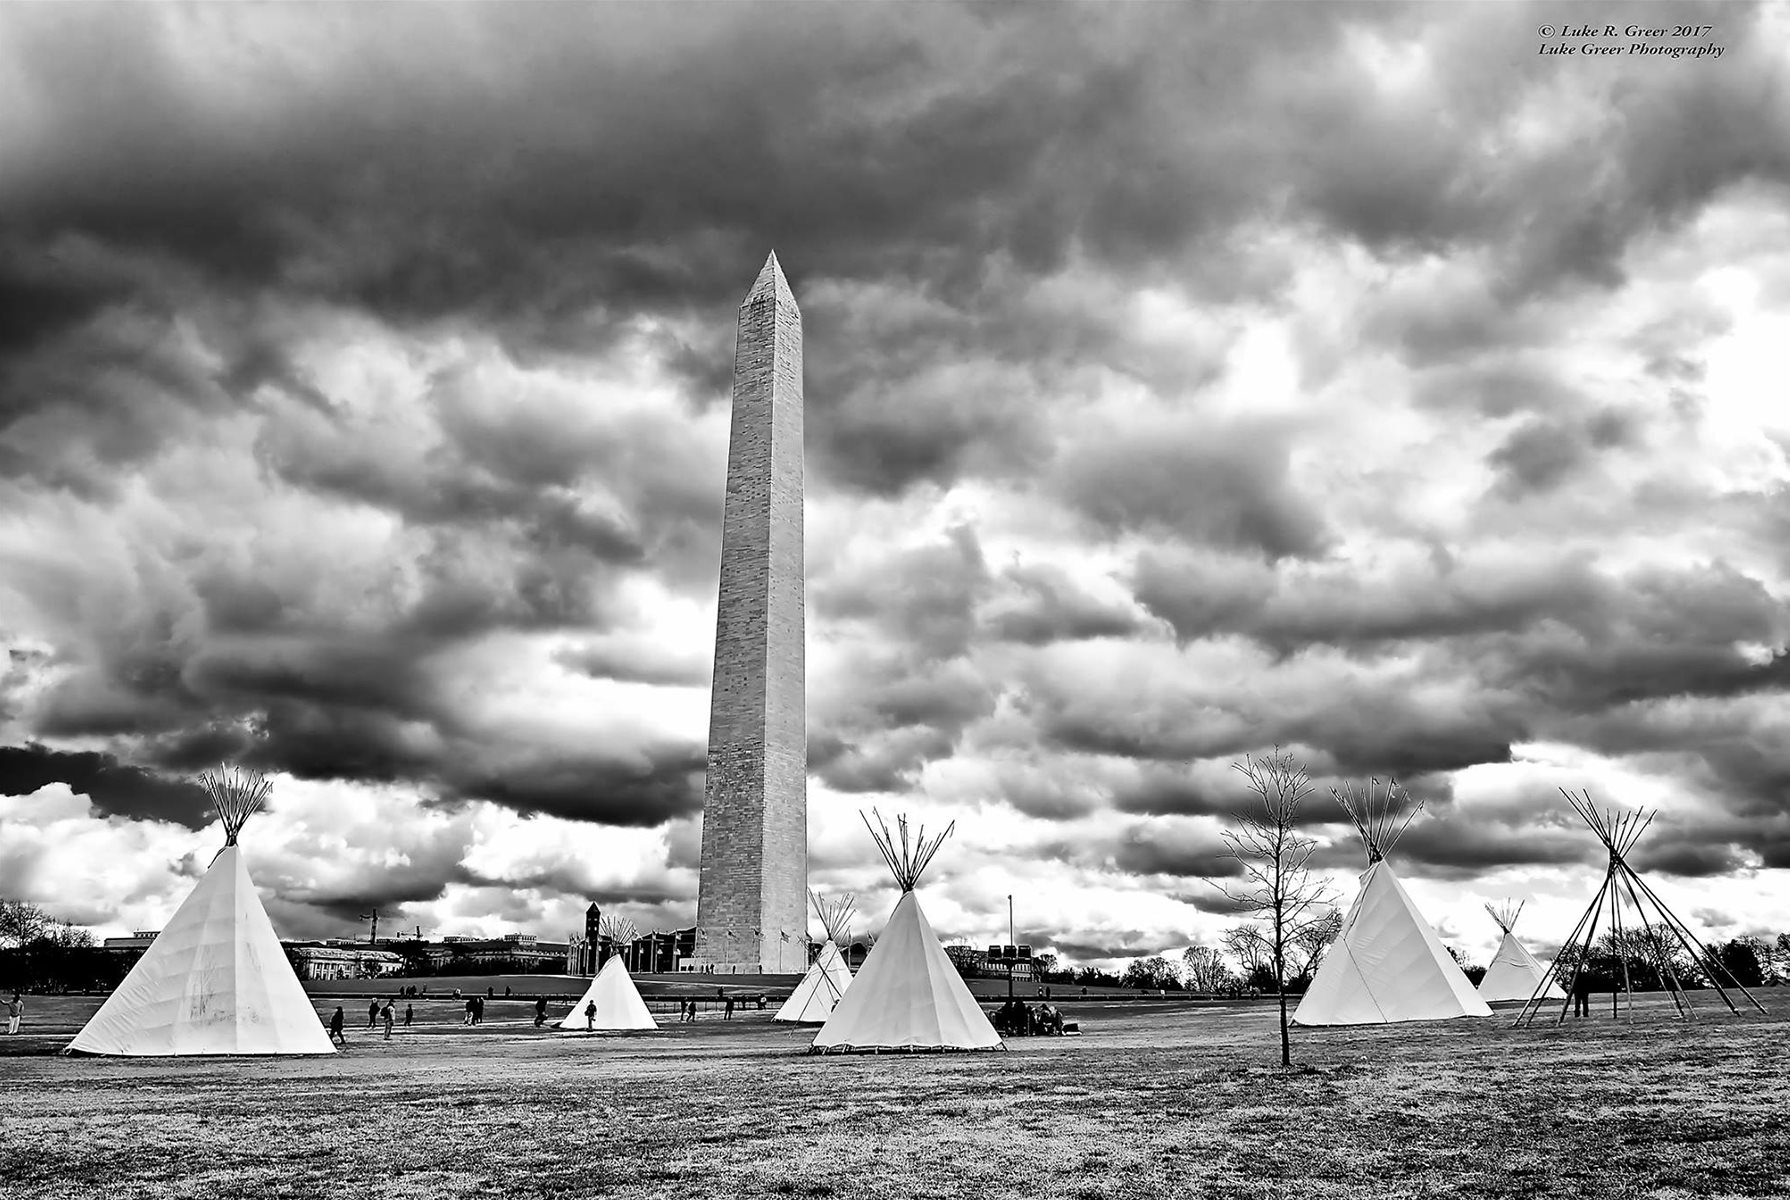 "Sioux Tipi Camp, Washington Monument, Washington DC", by Luke Greer, part of the "No Frame Required" virtual exhibit presented by Purcellville's Franklin Park Arts Center